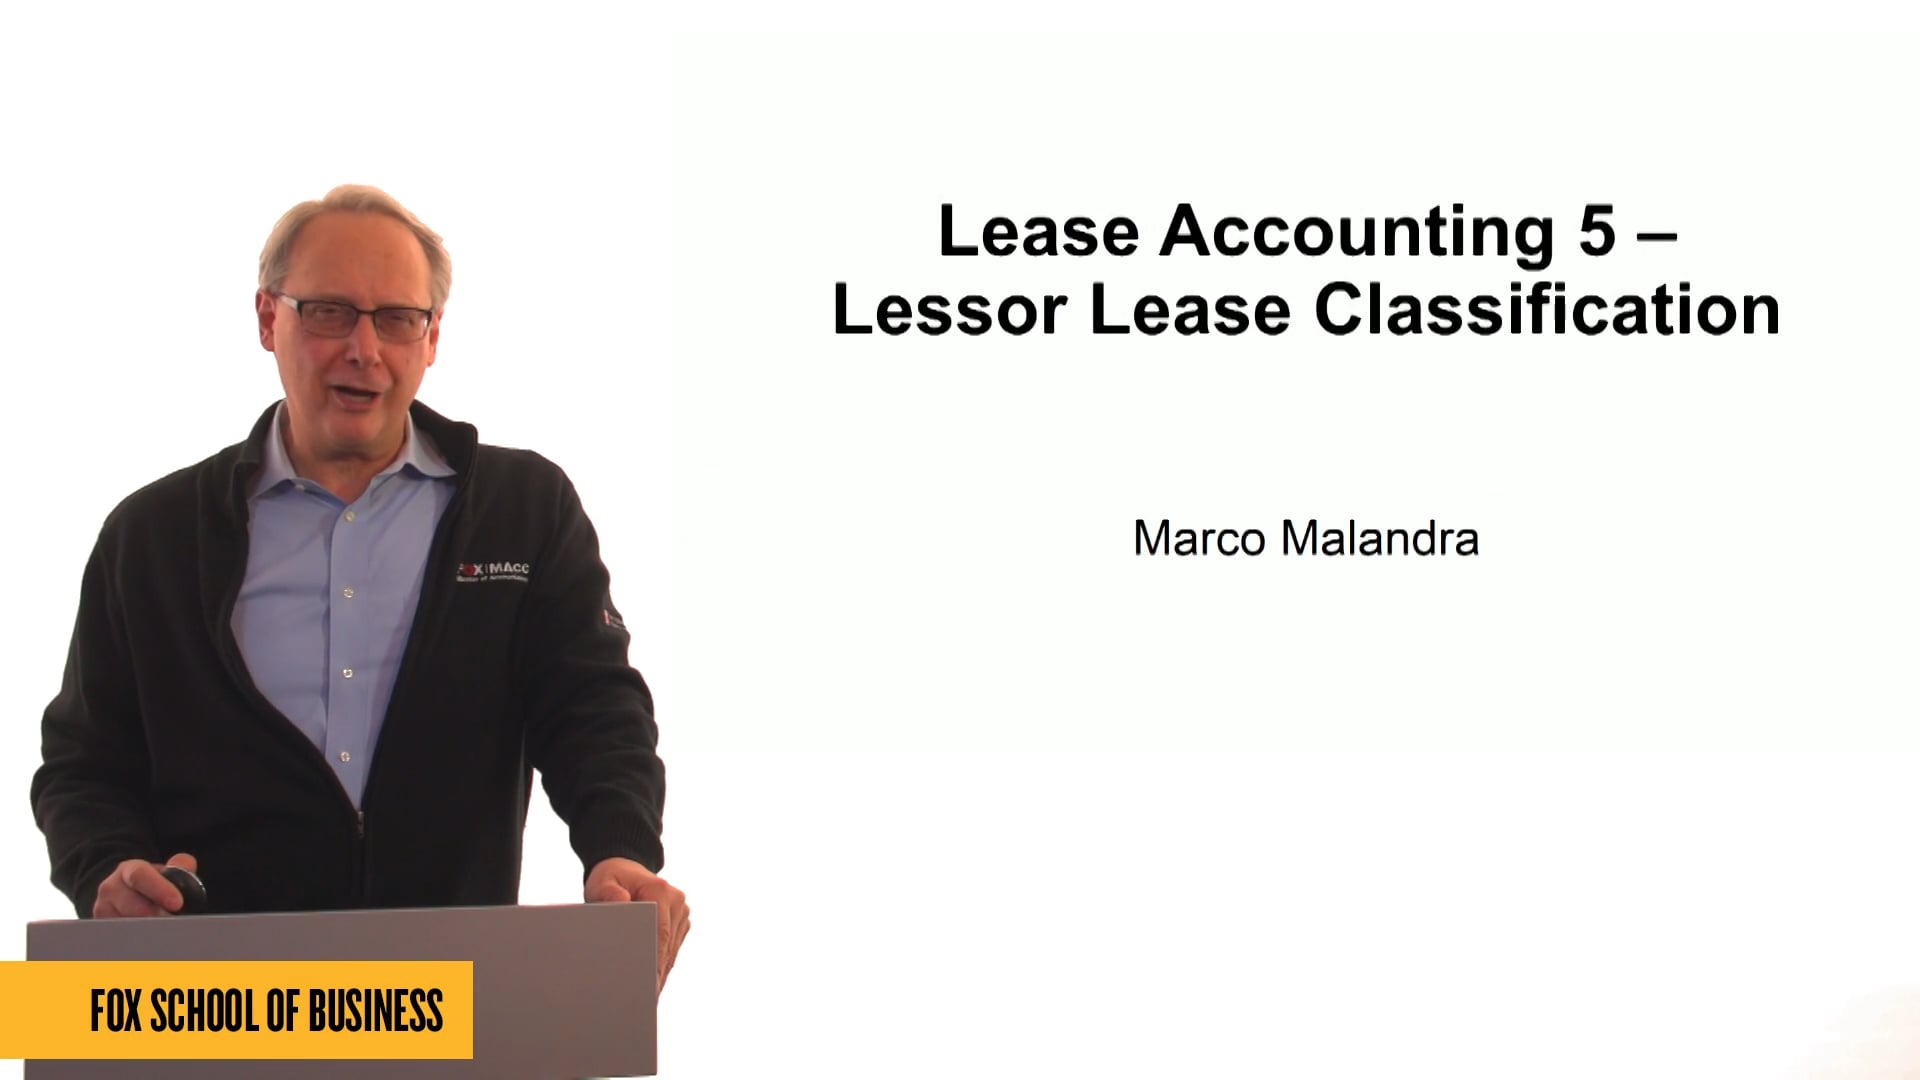 Lease Accounting 5: Lessor Lease Classification